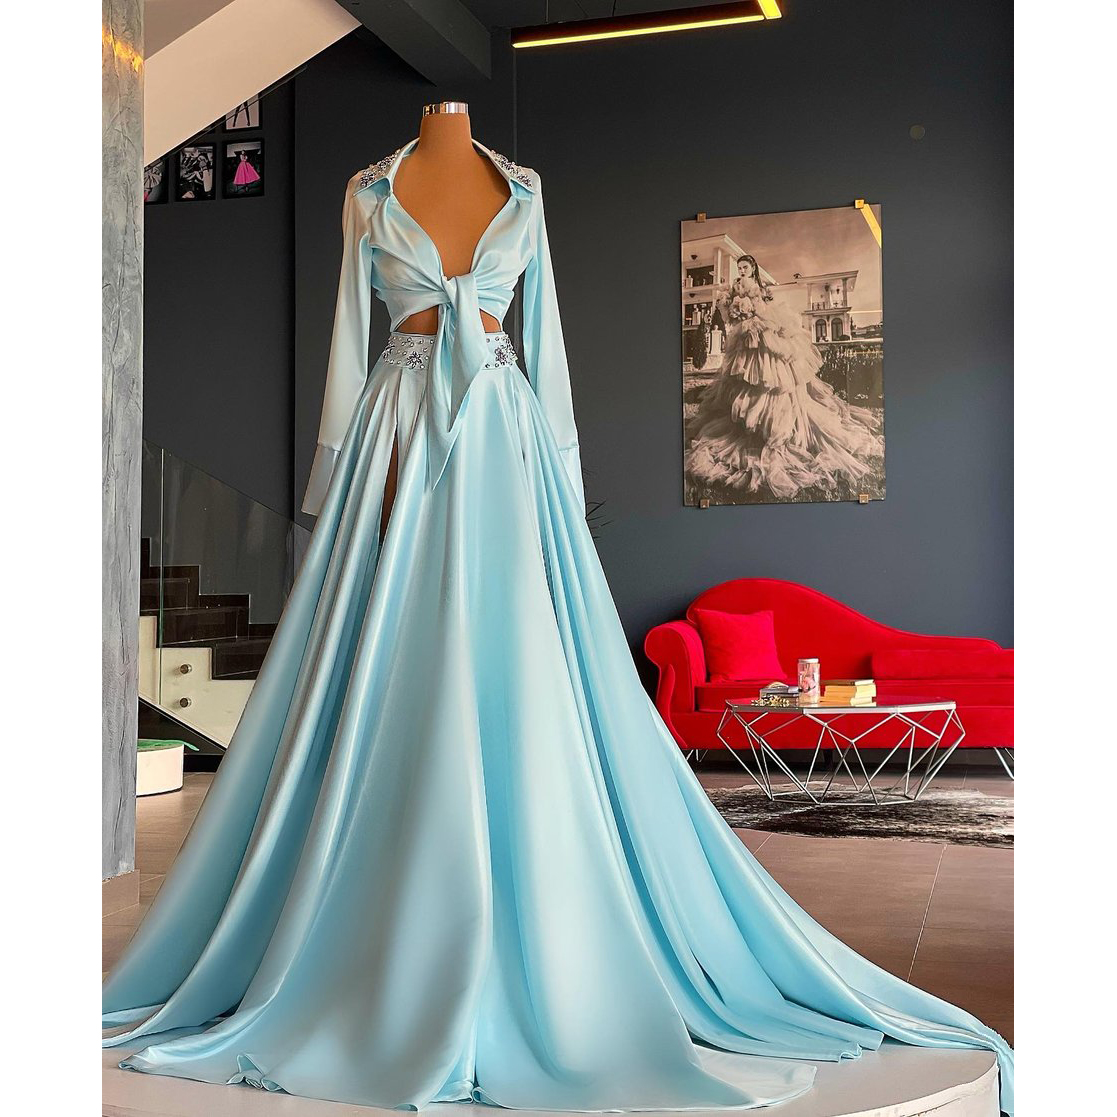 Fashion Splicing Elegant Evening Dresses Two Pieces Shirt High Split Prom Dress Long Sleeves Plus Size Women Party Gowns